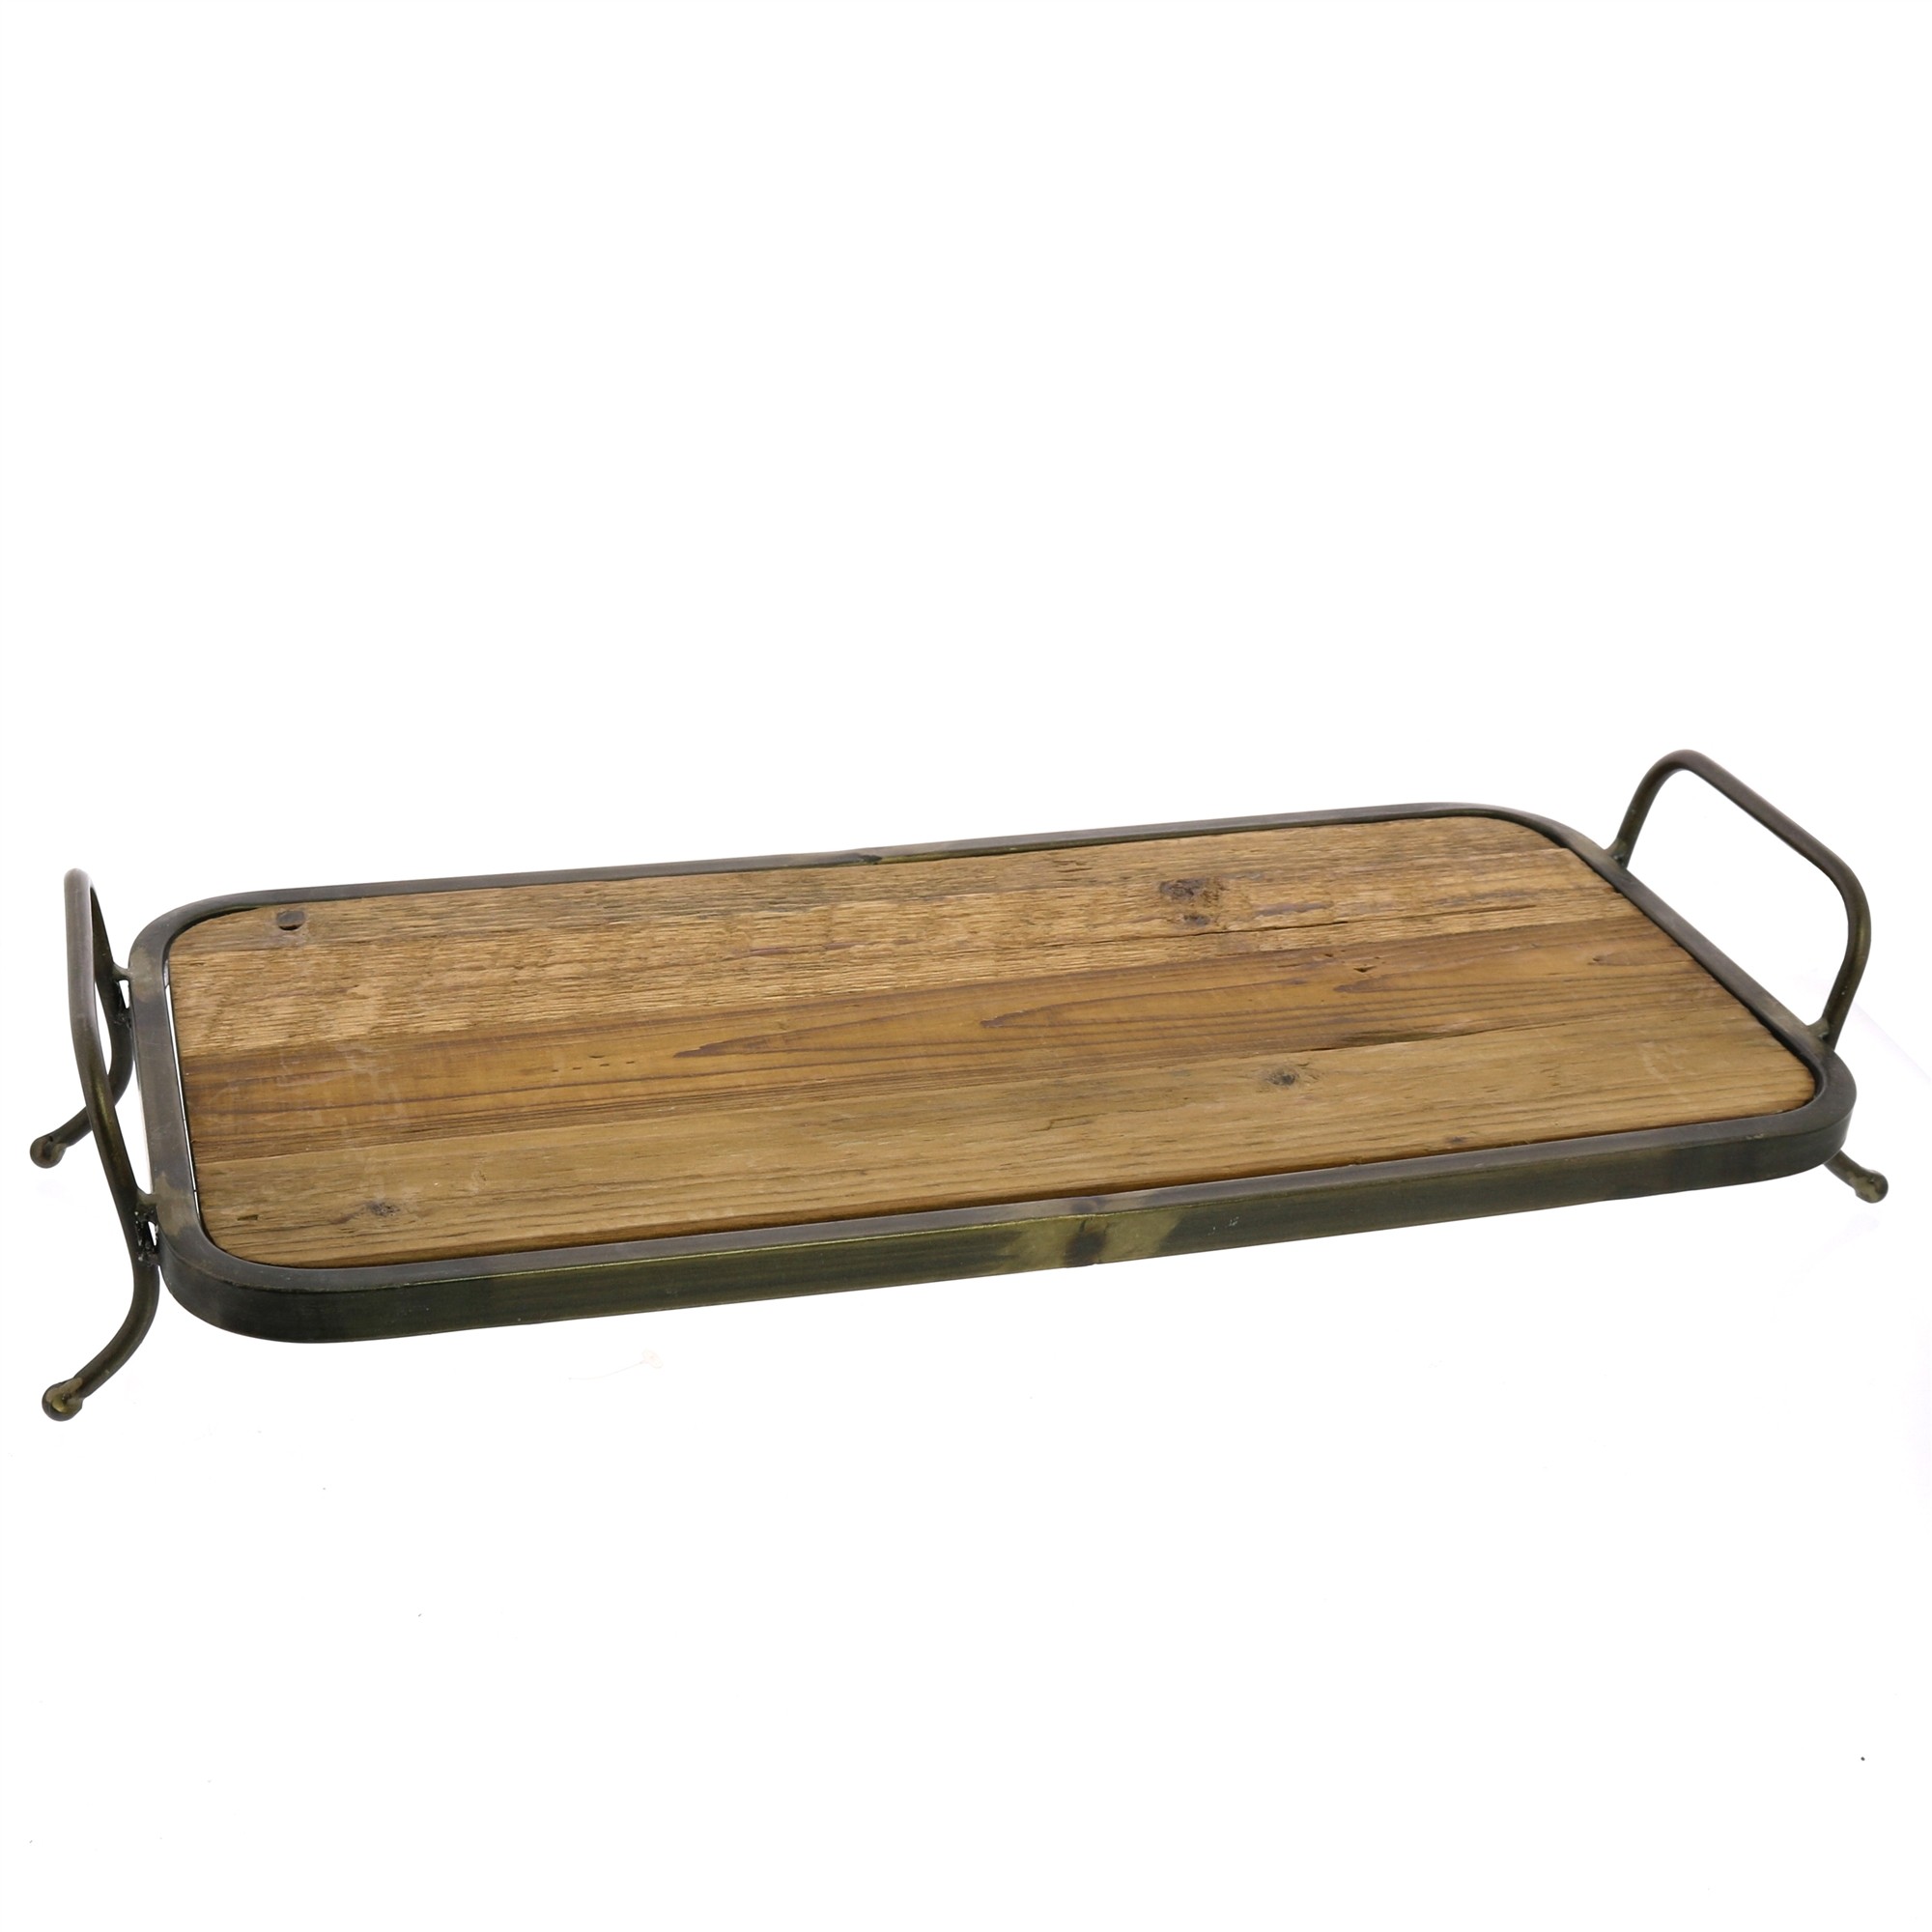 Rectangular Wooden Tray with Metal Edges